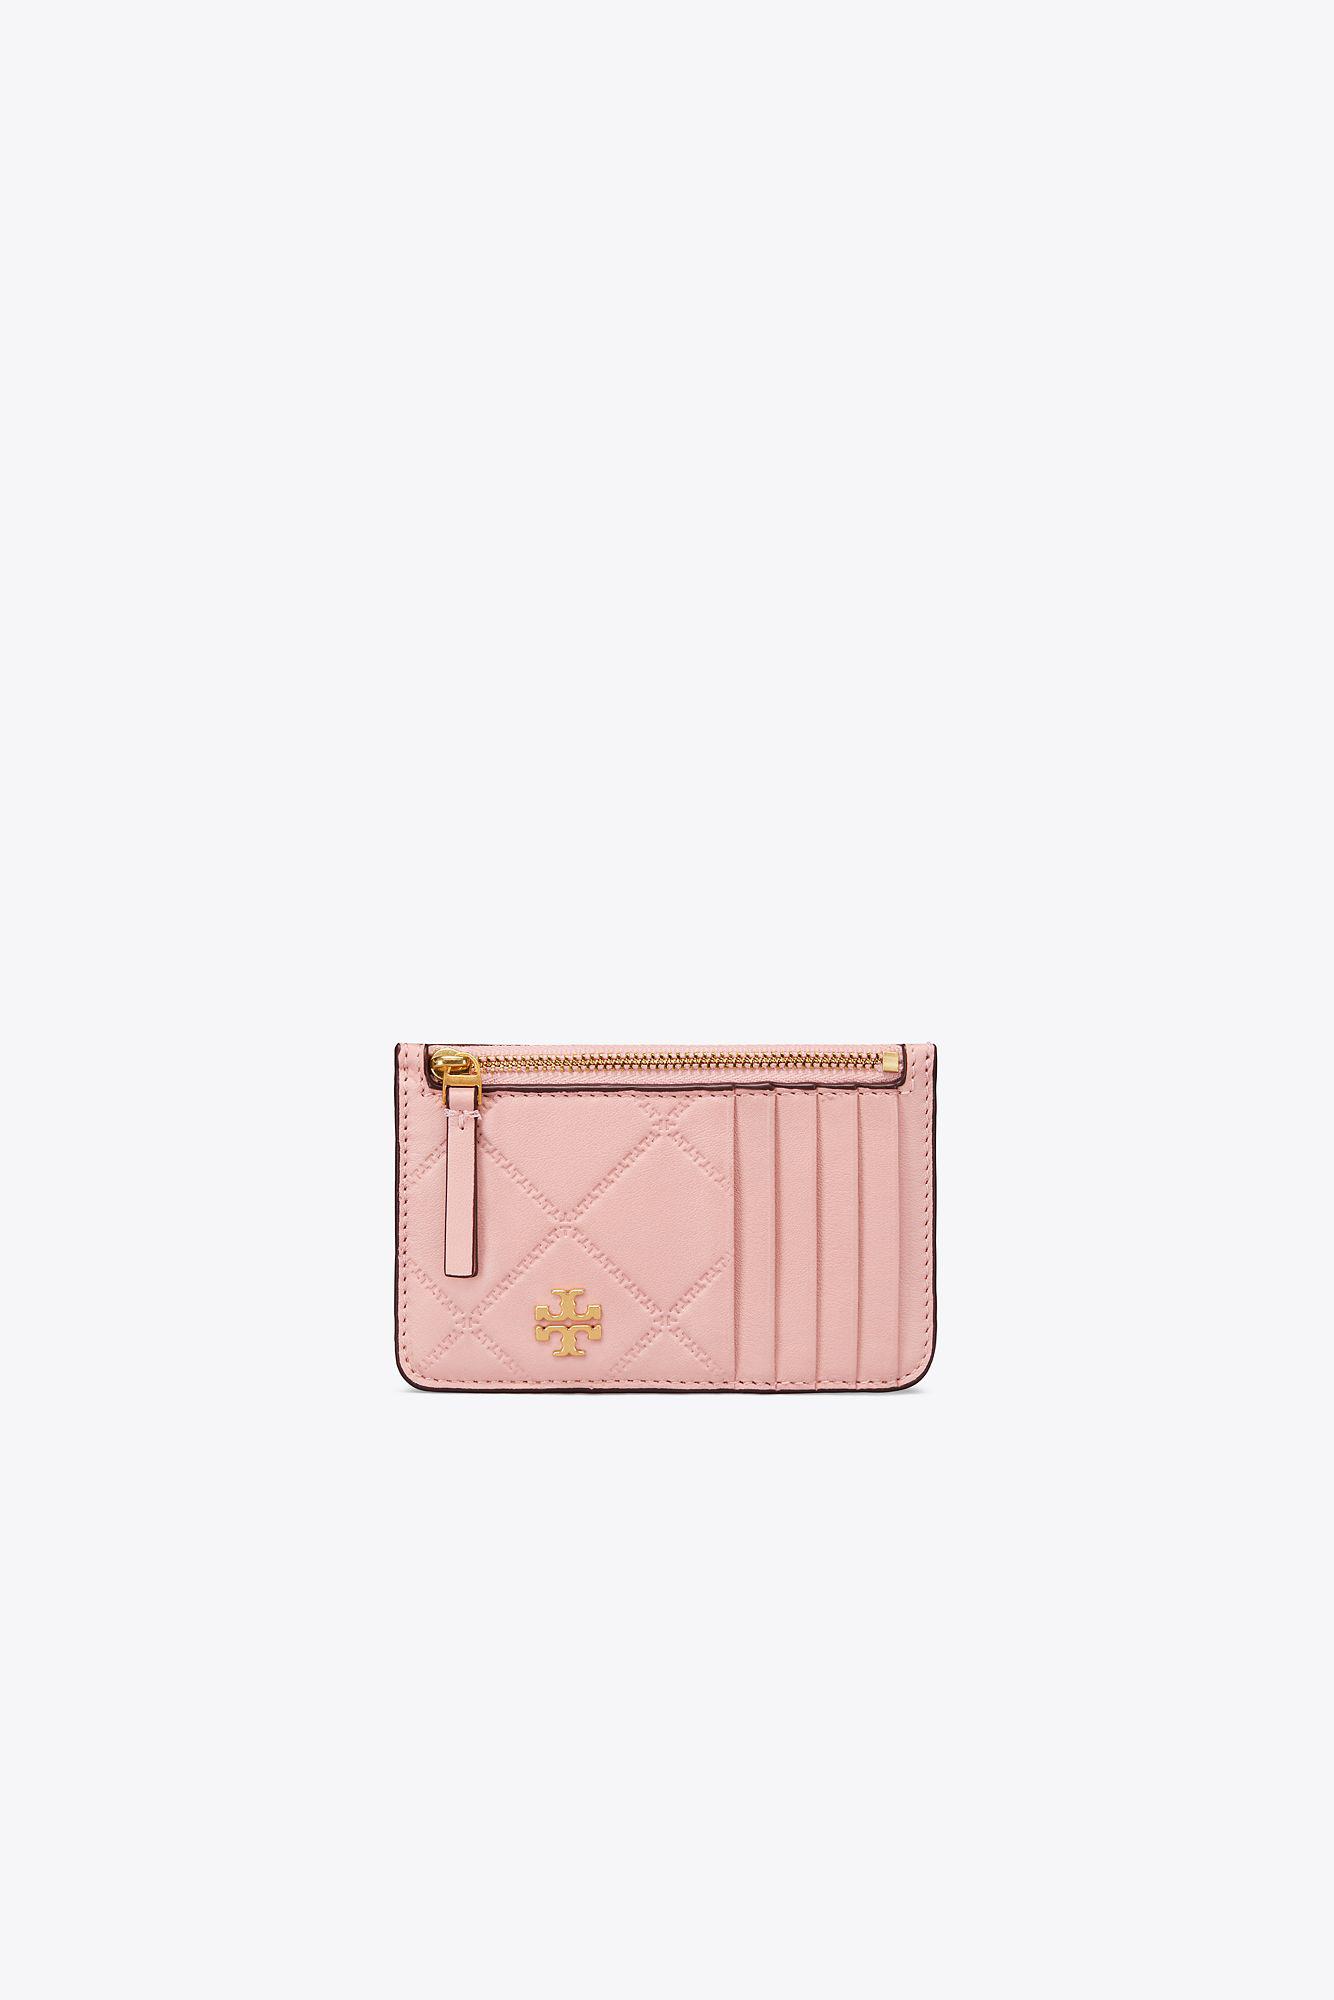 Tory Burch Leather Georgia Zip Card Case in Shell Pink (Pink 